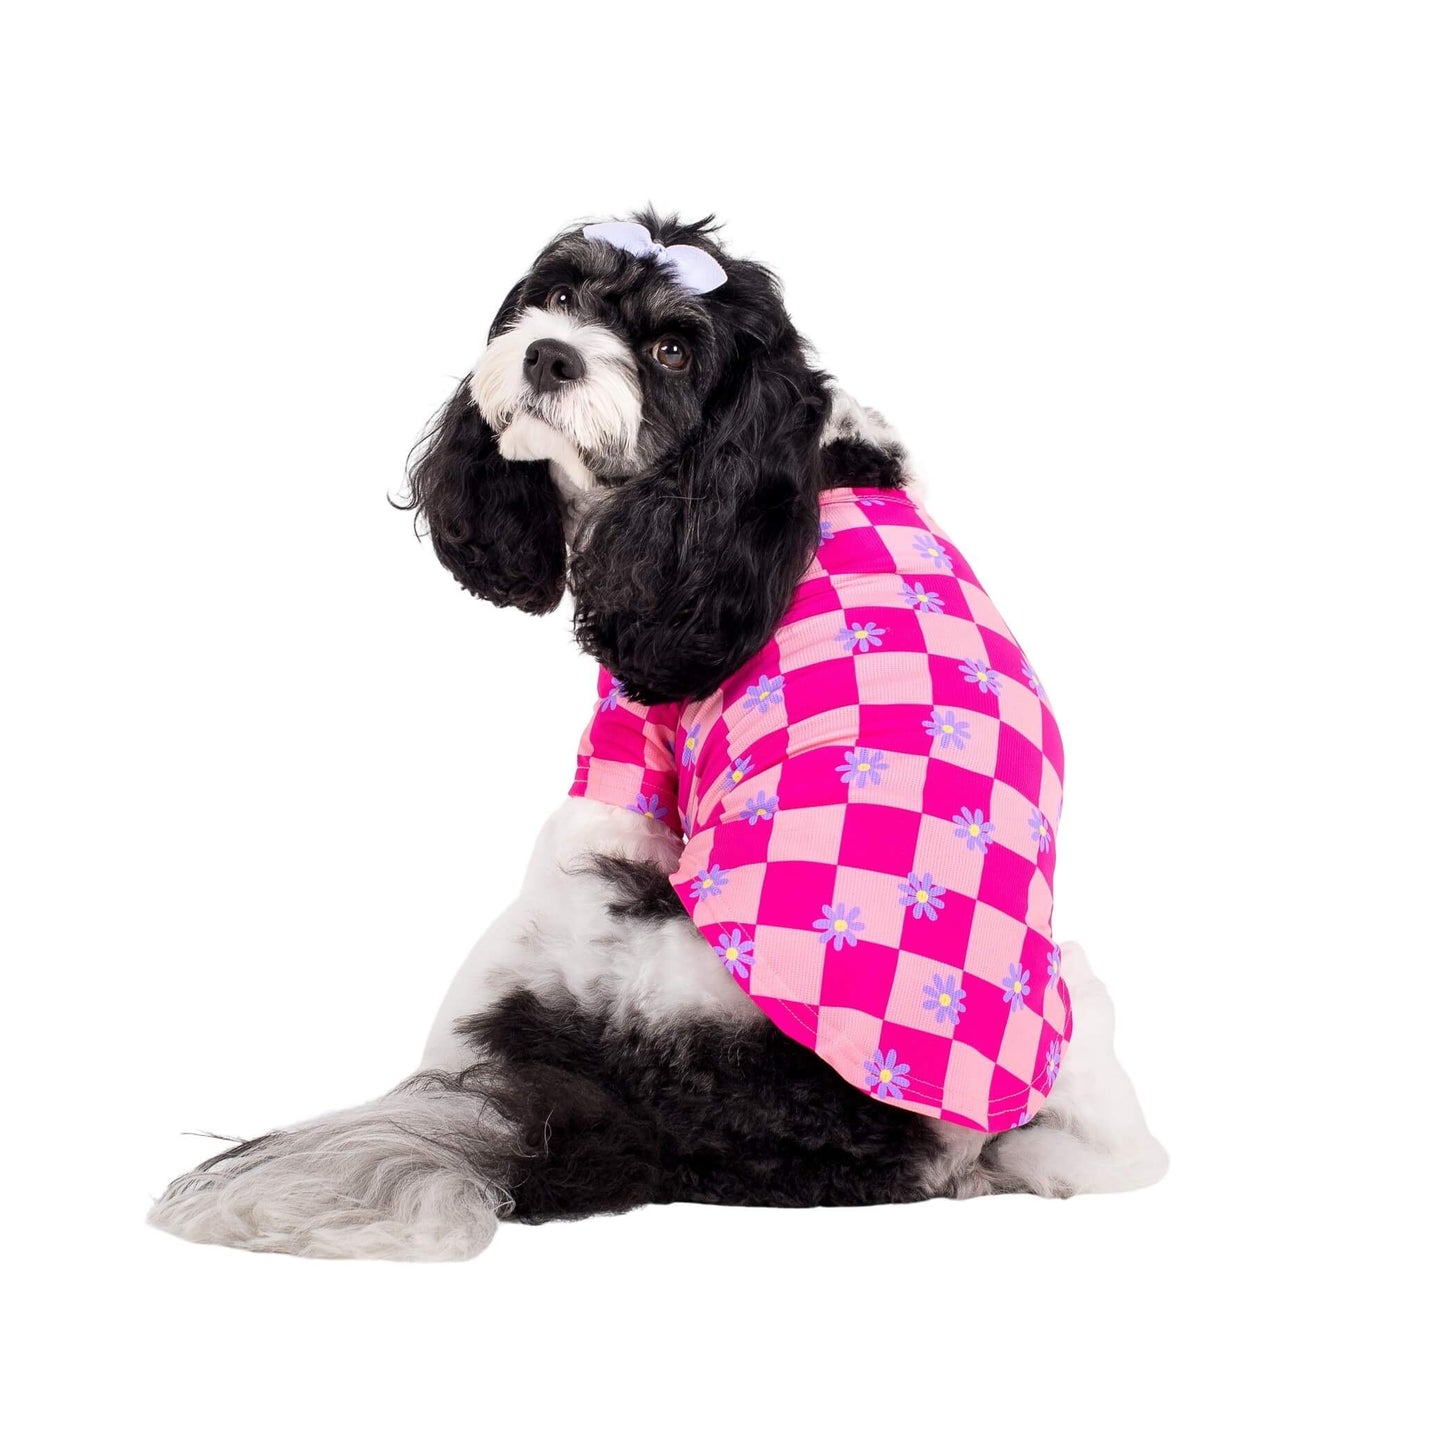 Cavoodle facing away wearing Vibrant Hounds Crazy Daisy cooling shirt for dogs. It is pink chequered with daisys printed on it.